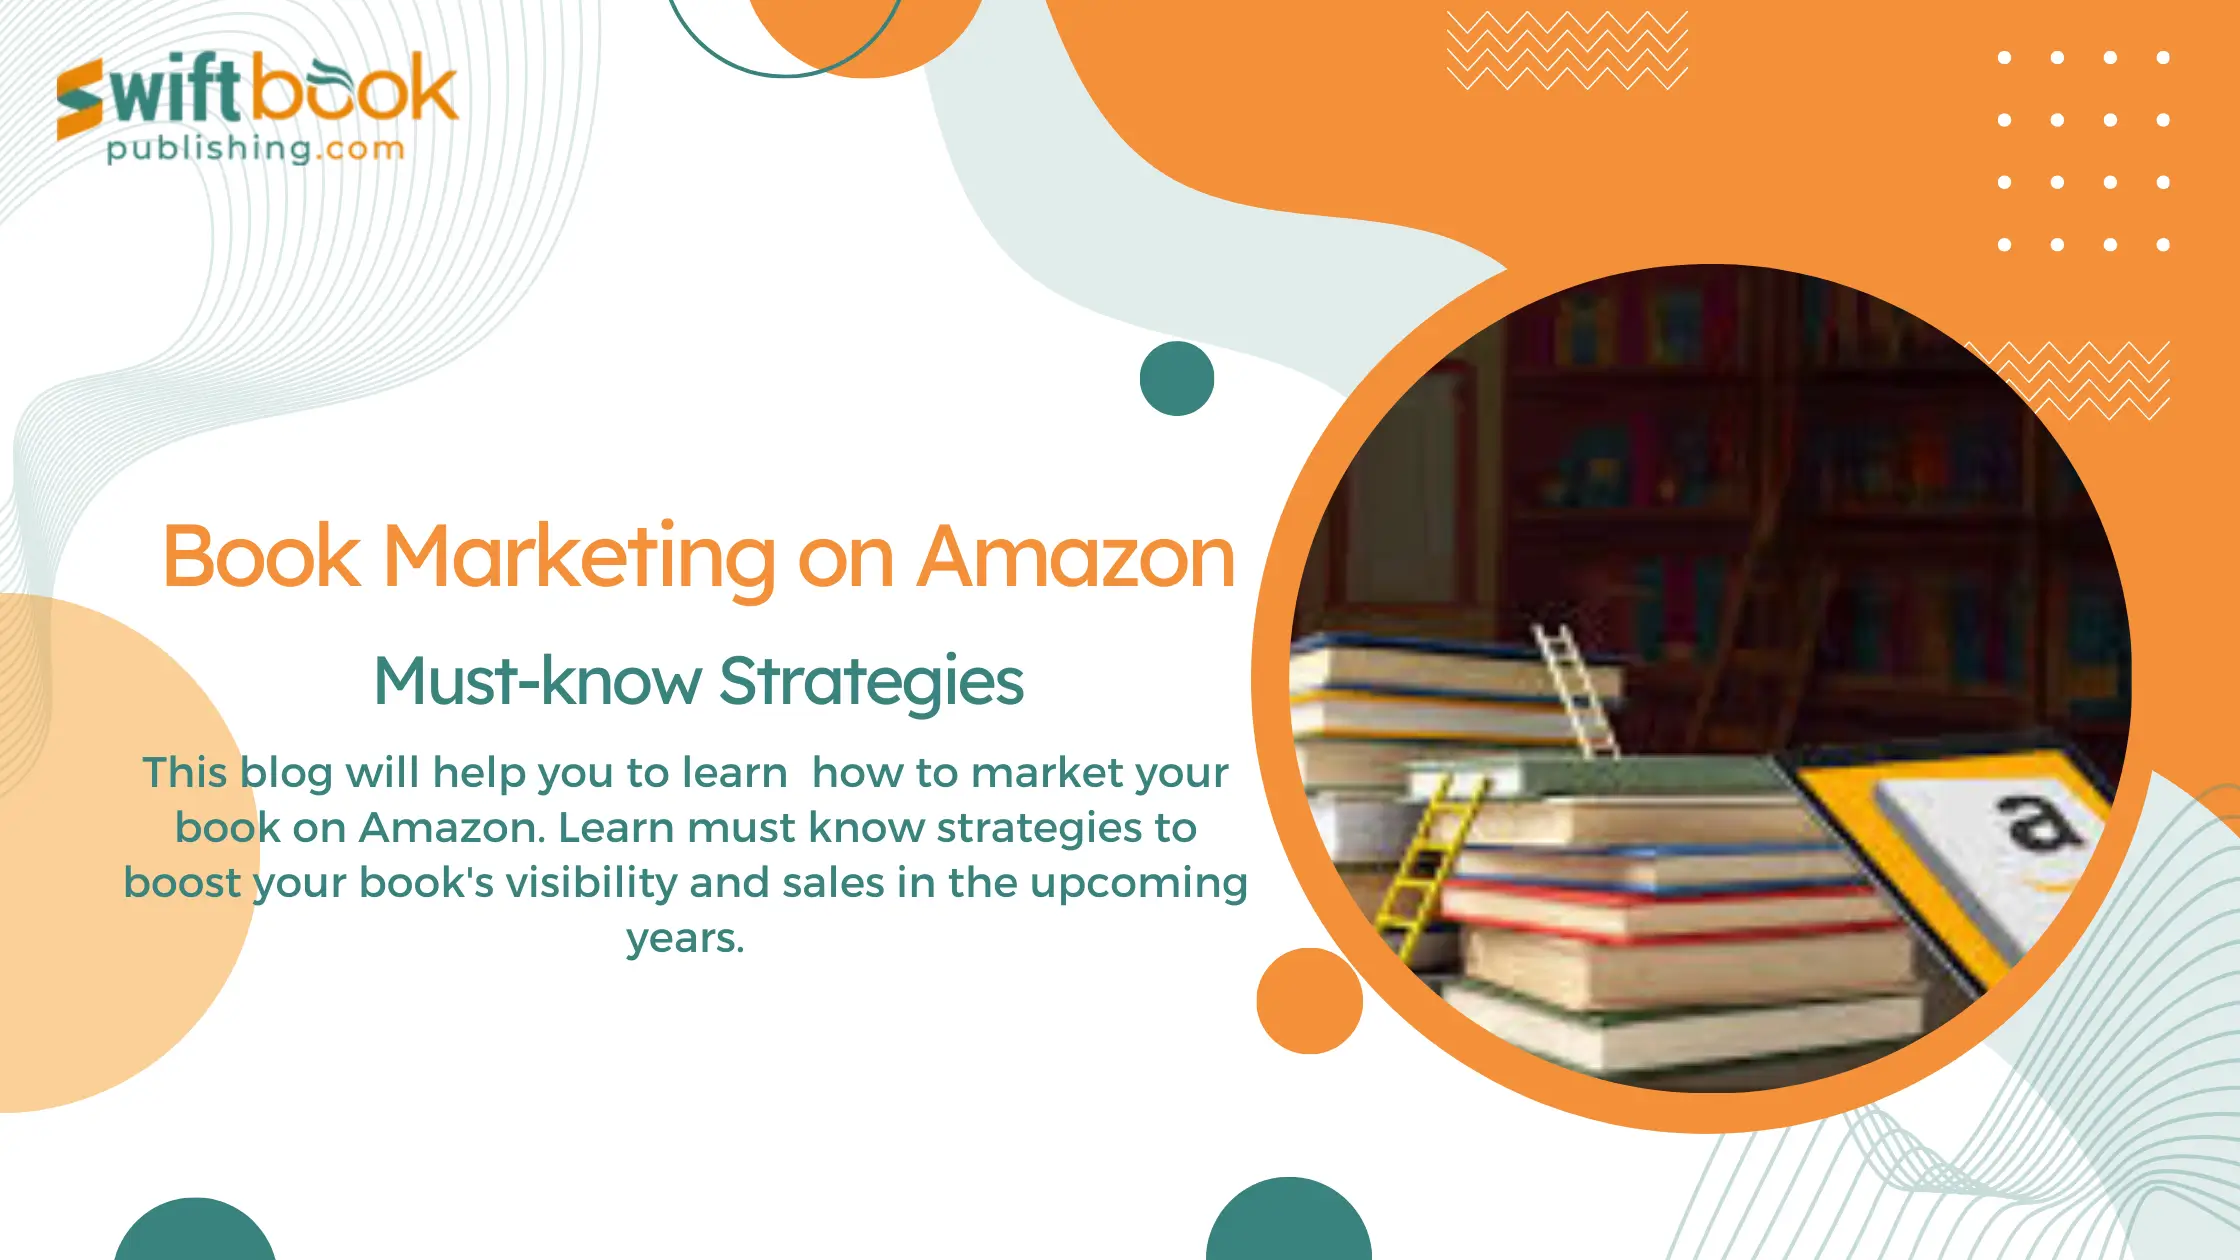 How to Market Your Book on Amazon in Upcoming Years